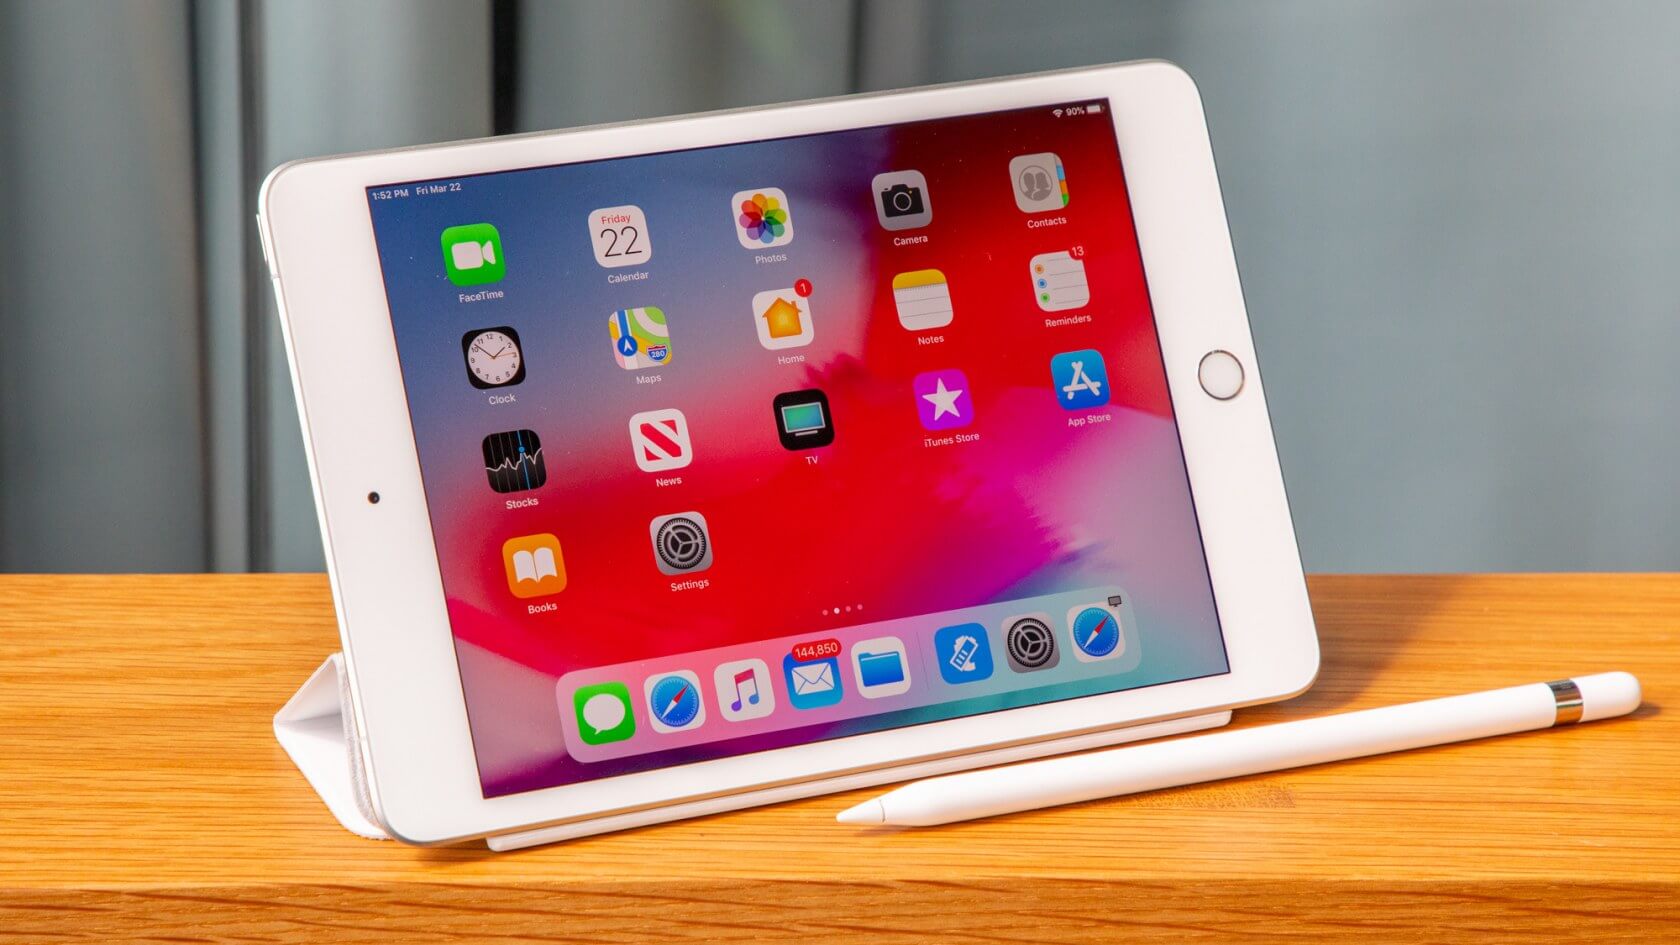 Regulatory filings suggest Apple is planning to launch new iPads this year